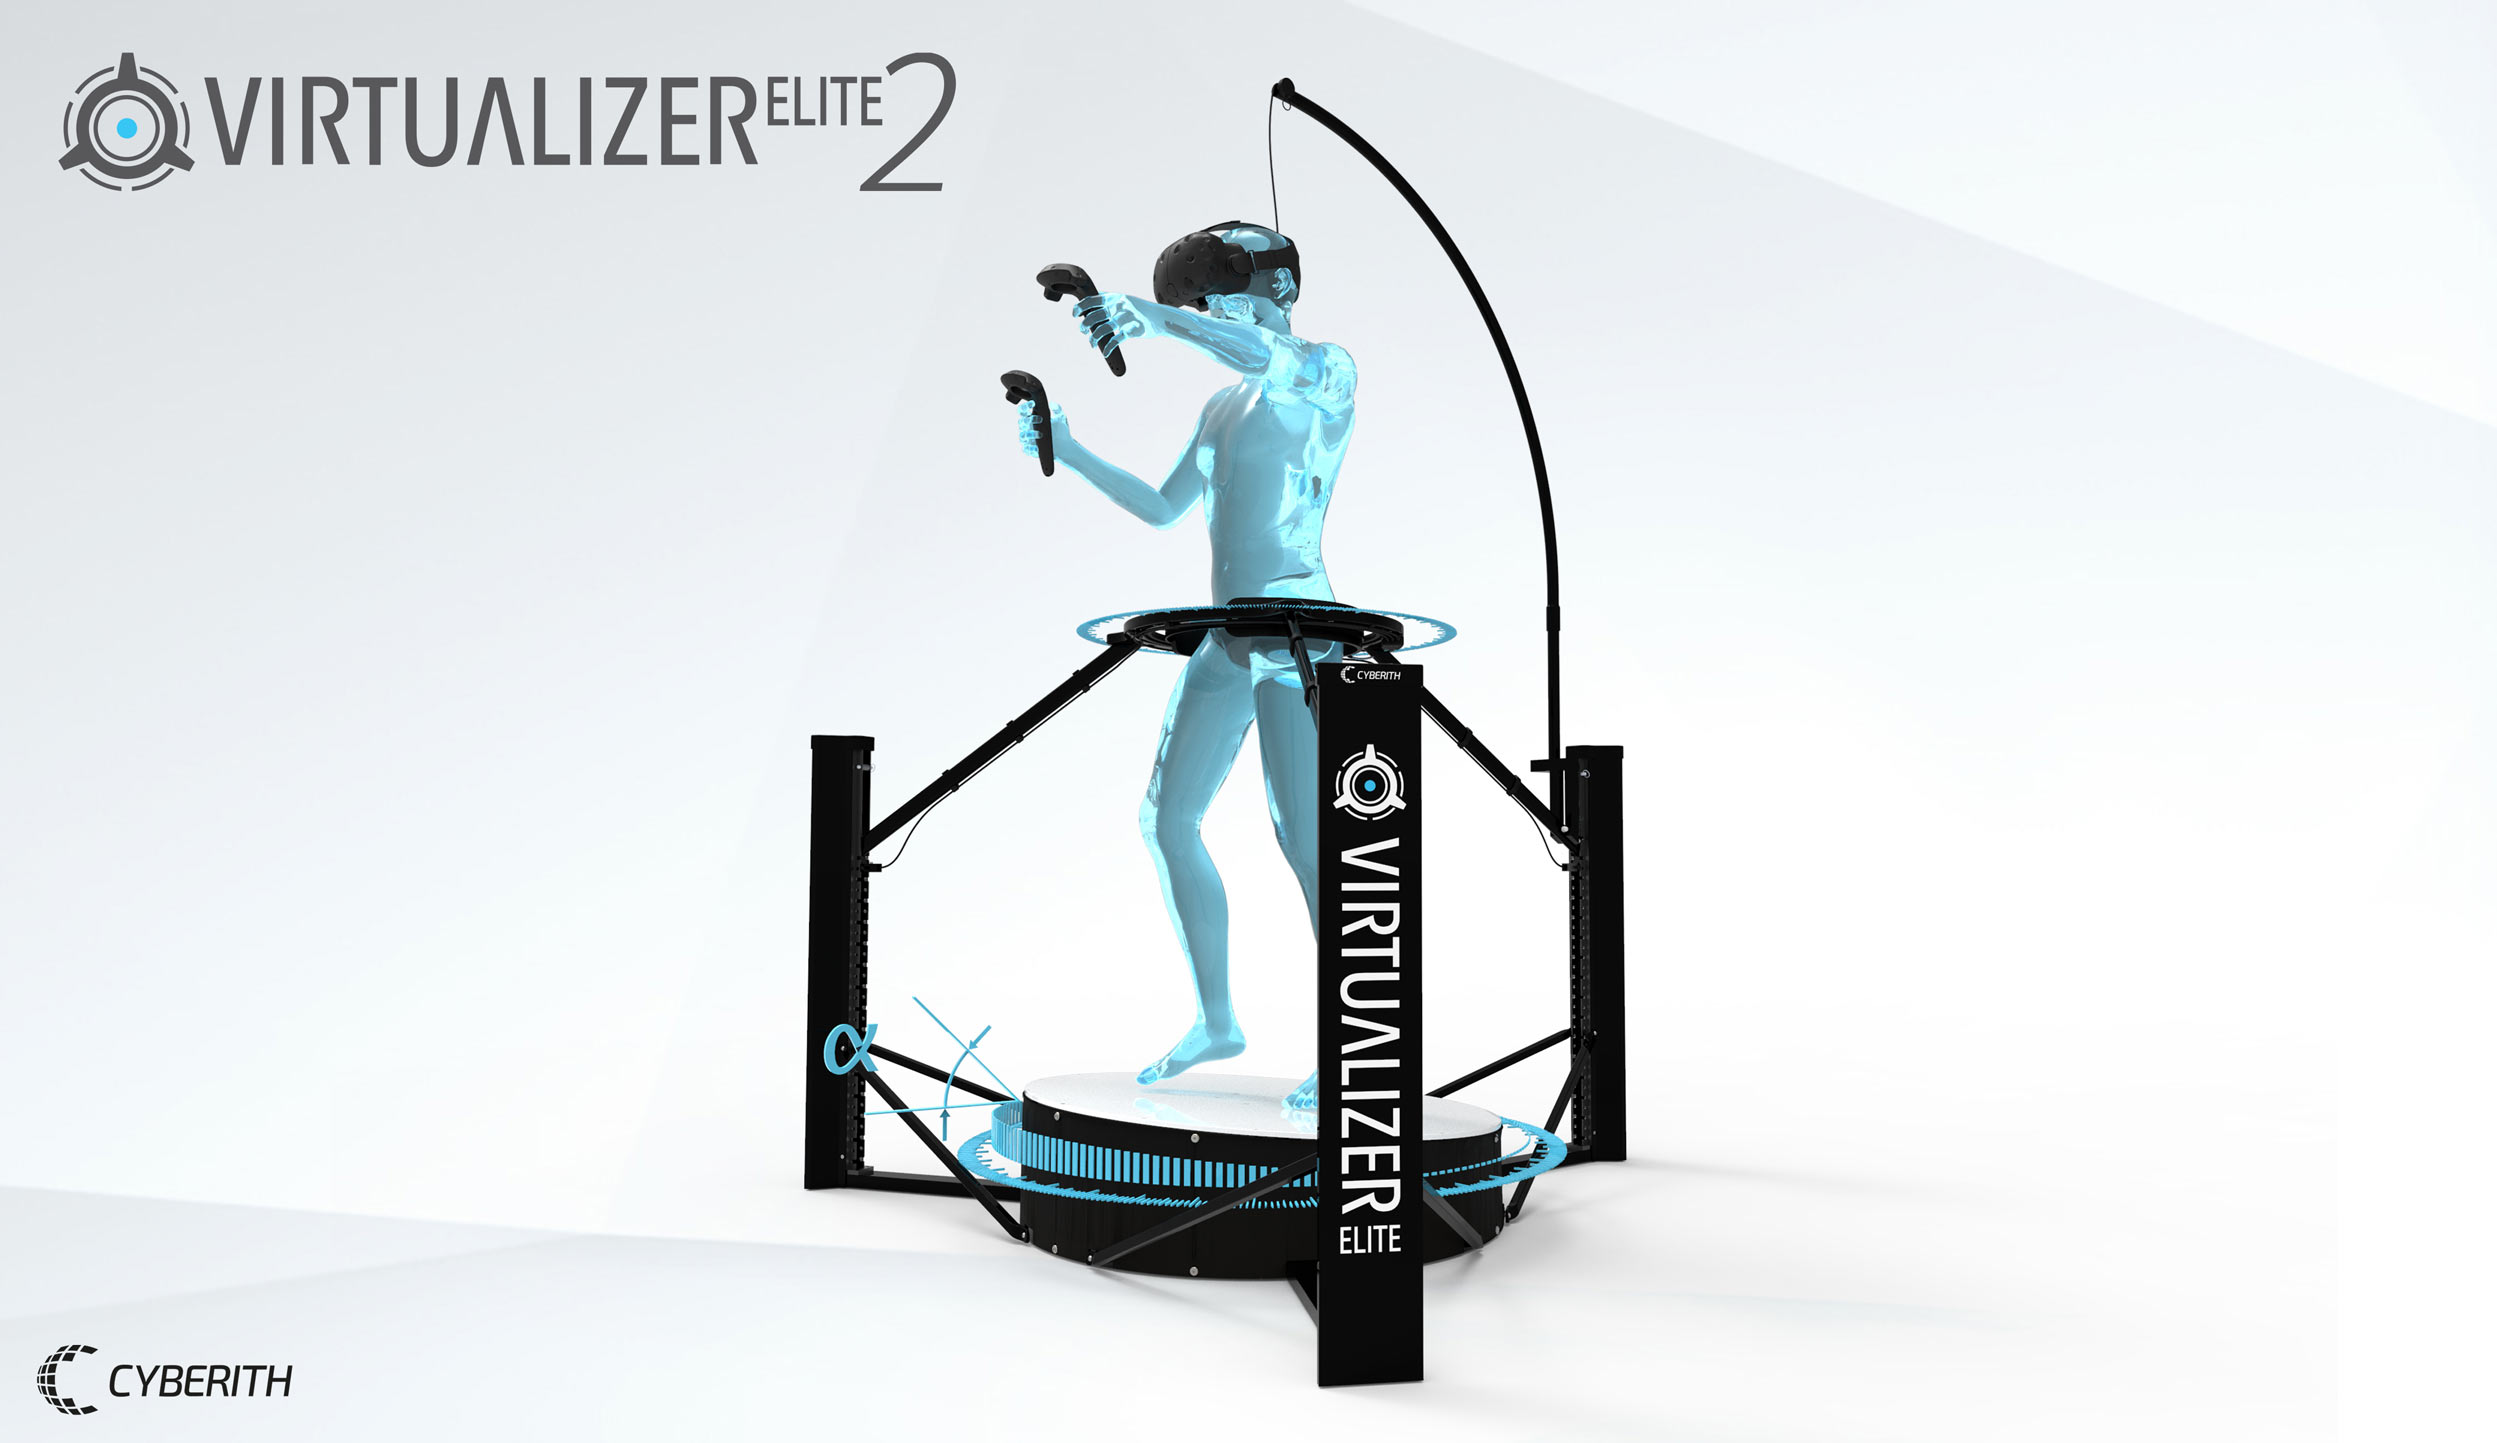 Cyberith announces 2nd gen Virtualizer, still thinks about its backers